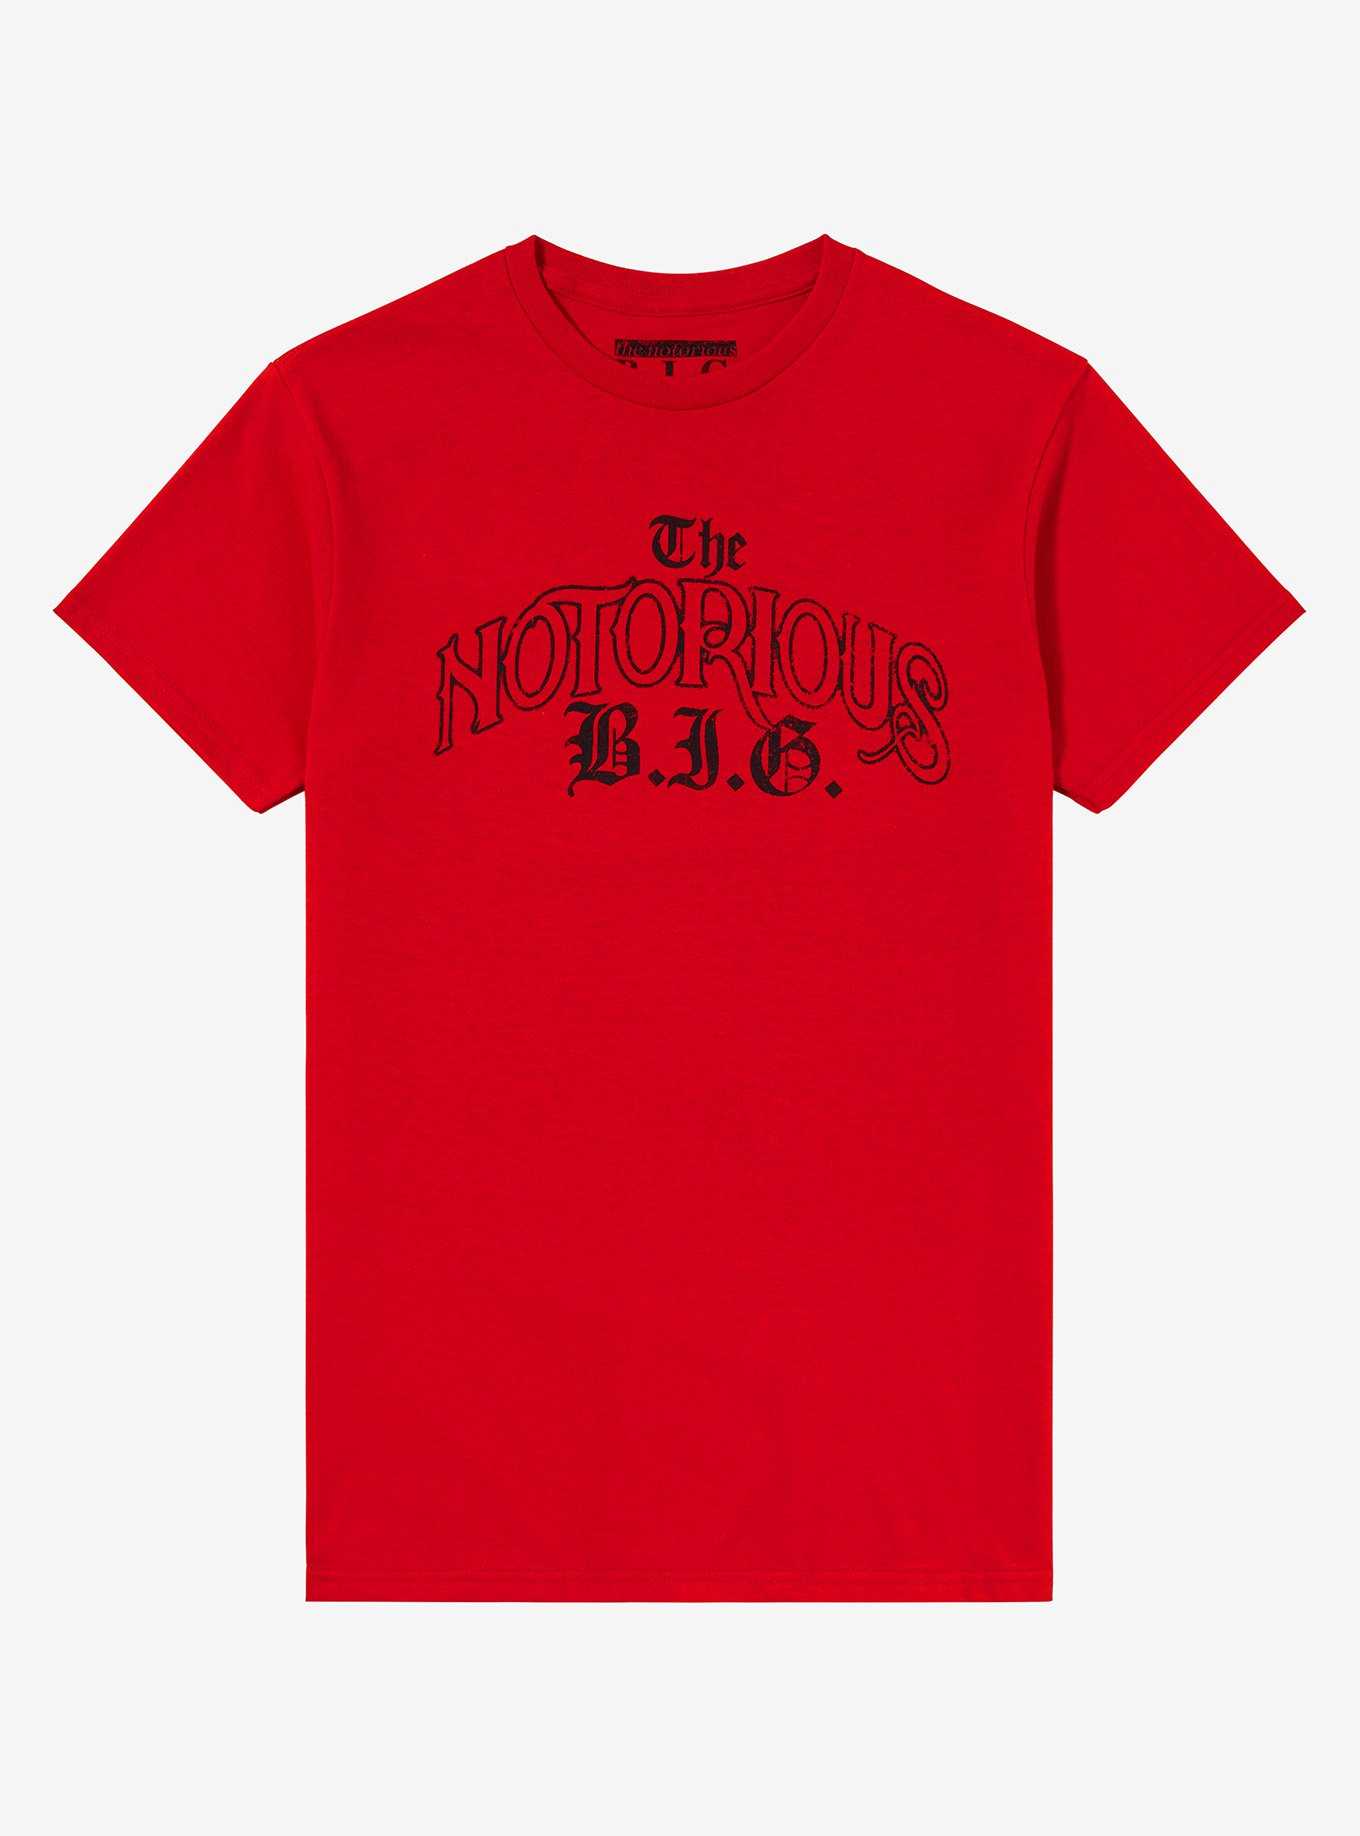 The Notorious B.I.G. Two-Sided Boyfriend Fit Girls T-Shirt, , hi-res